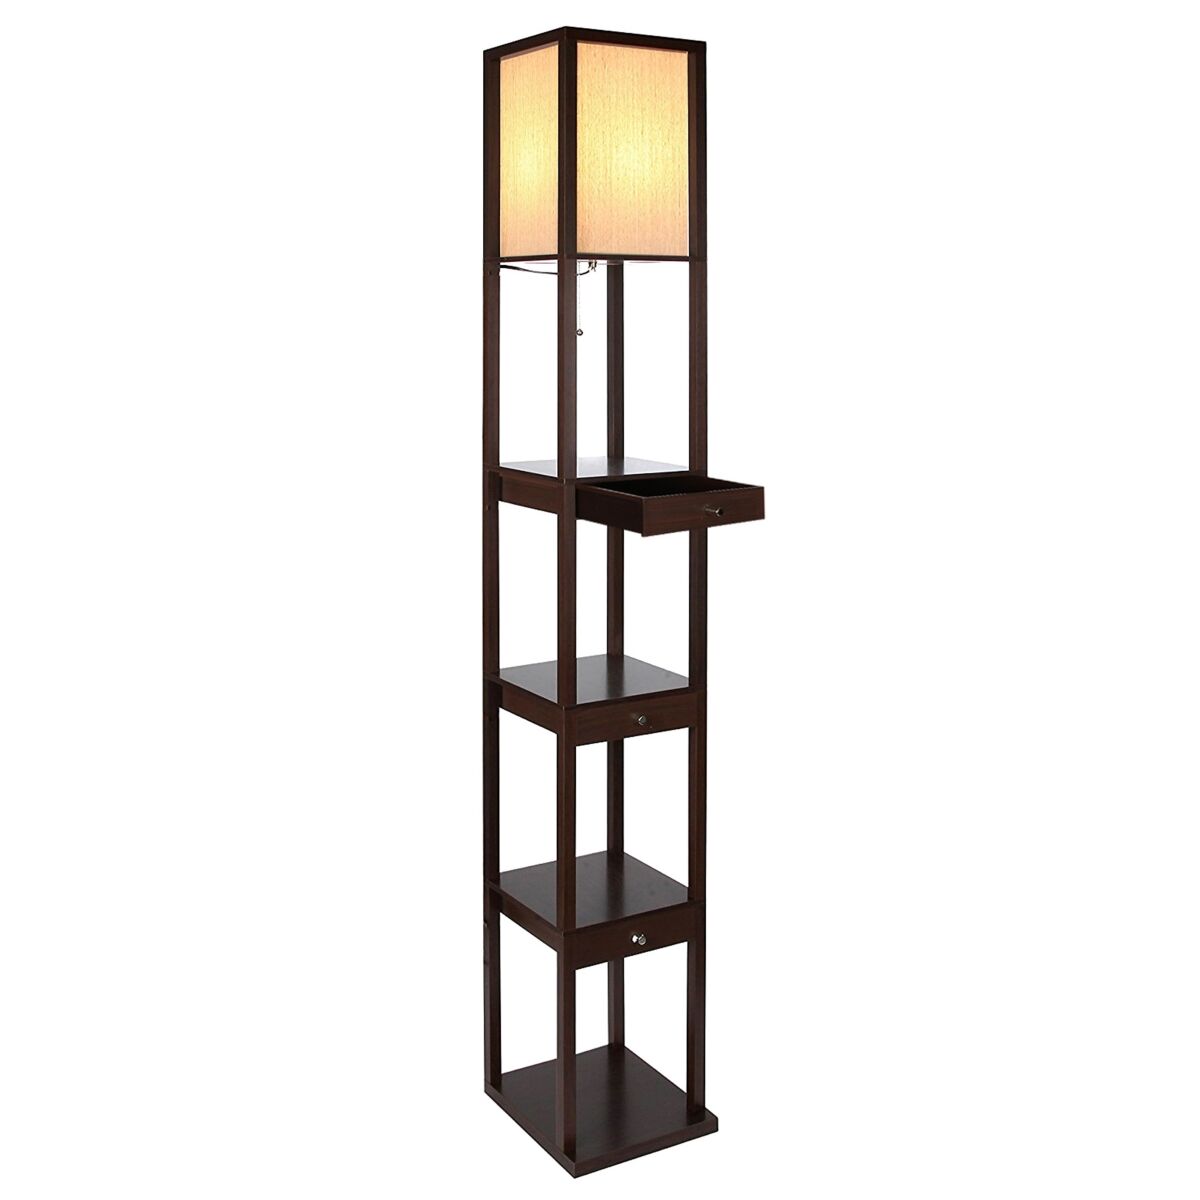 Brightech Maxwell Shelf & Led Floor Lamp with Lantern Shade with Drawers - Havana Brown